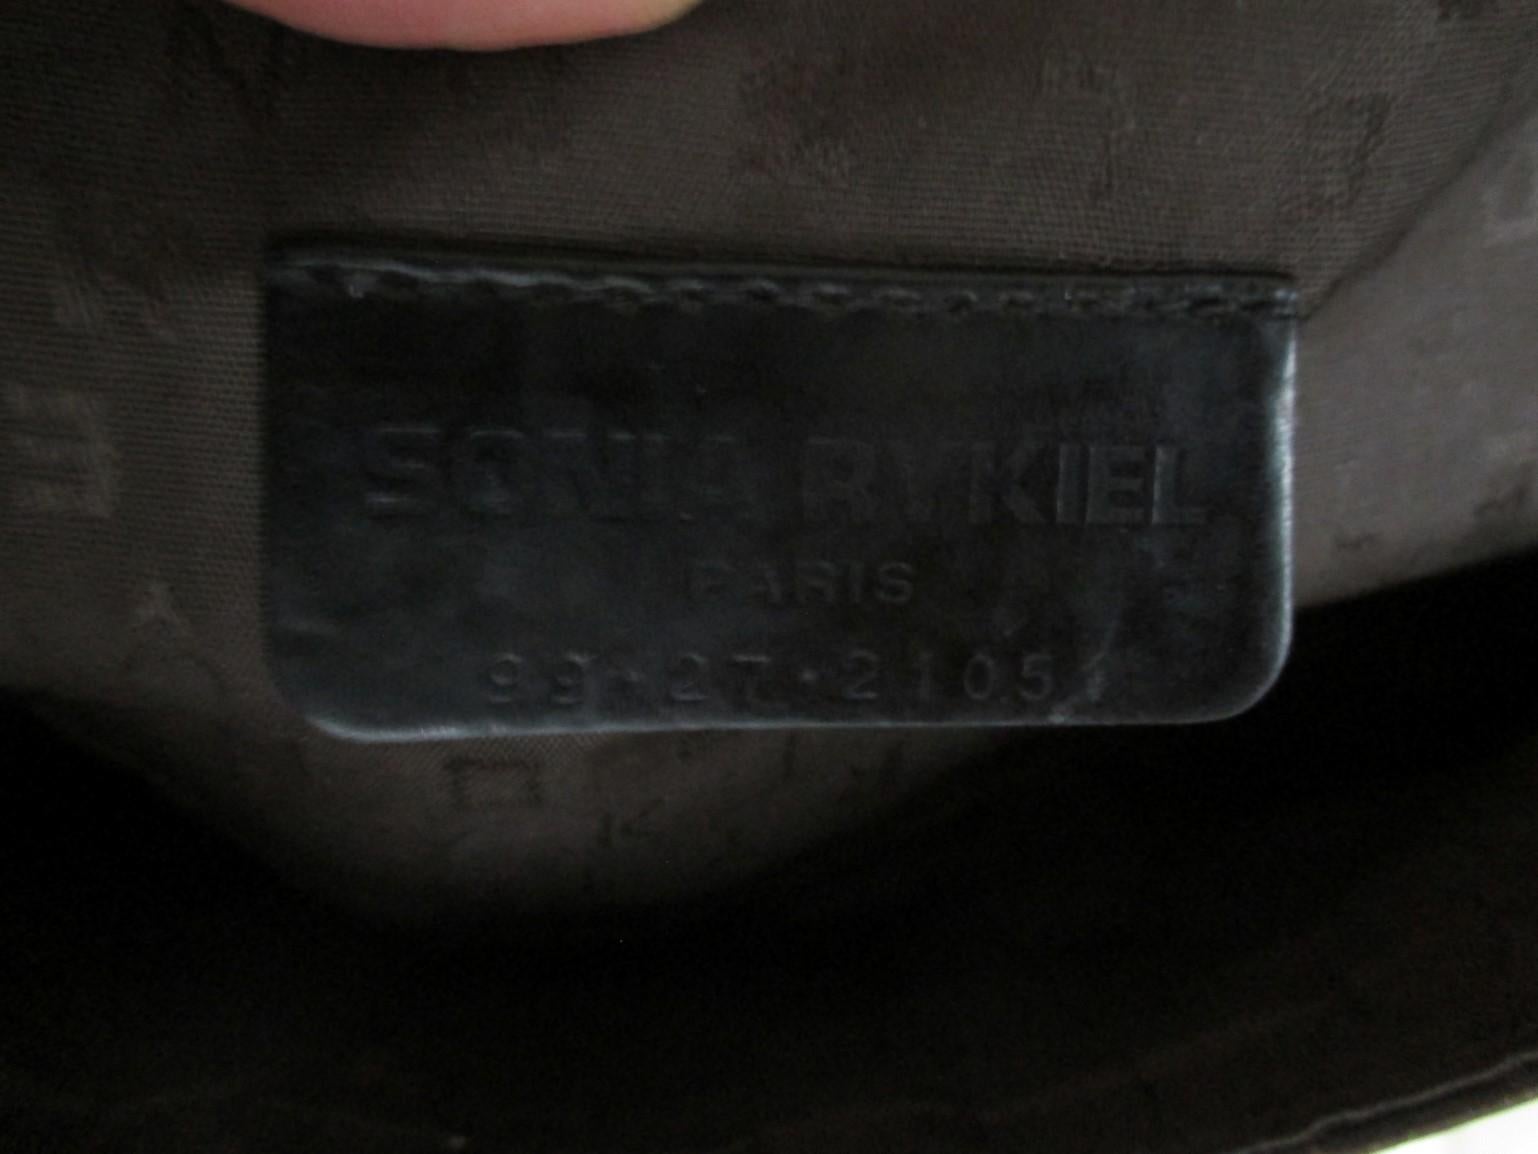 Sonia Rykiel Paris printed Embossed Leather Hand Bag In Good Condition For Sale In Amsterdam, NL